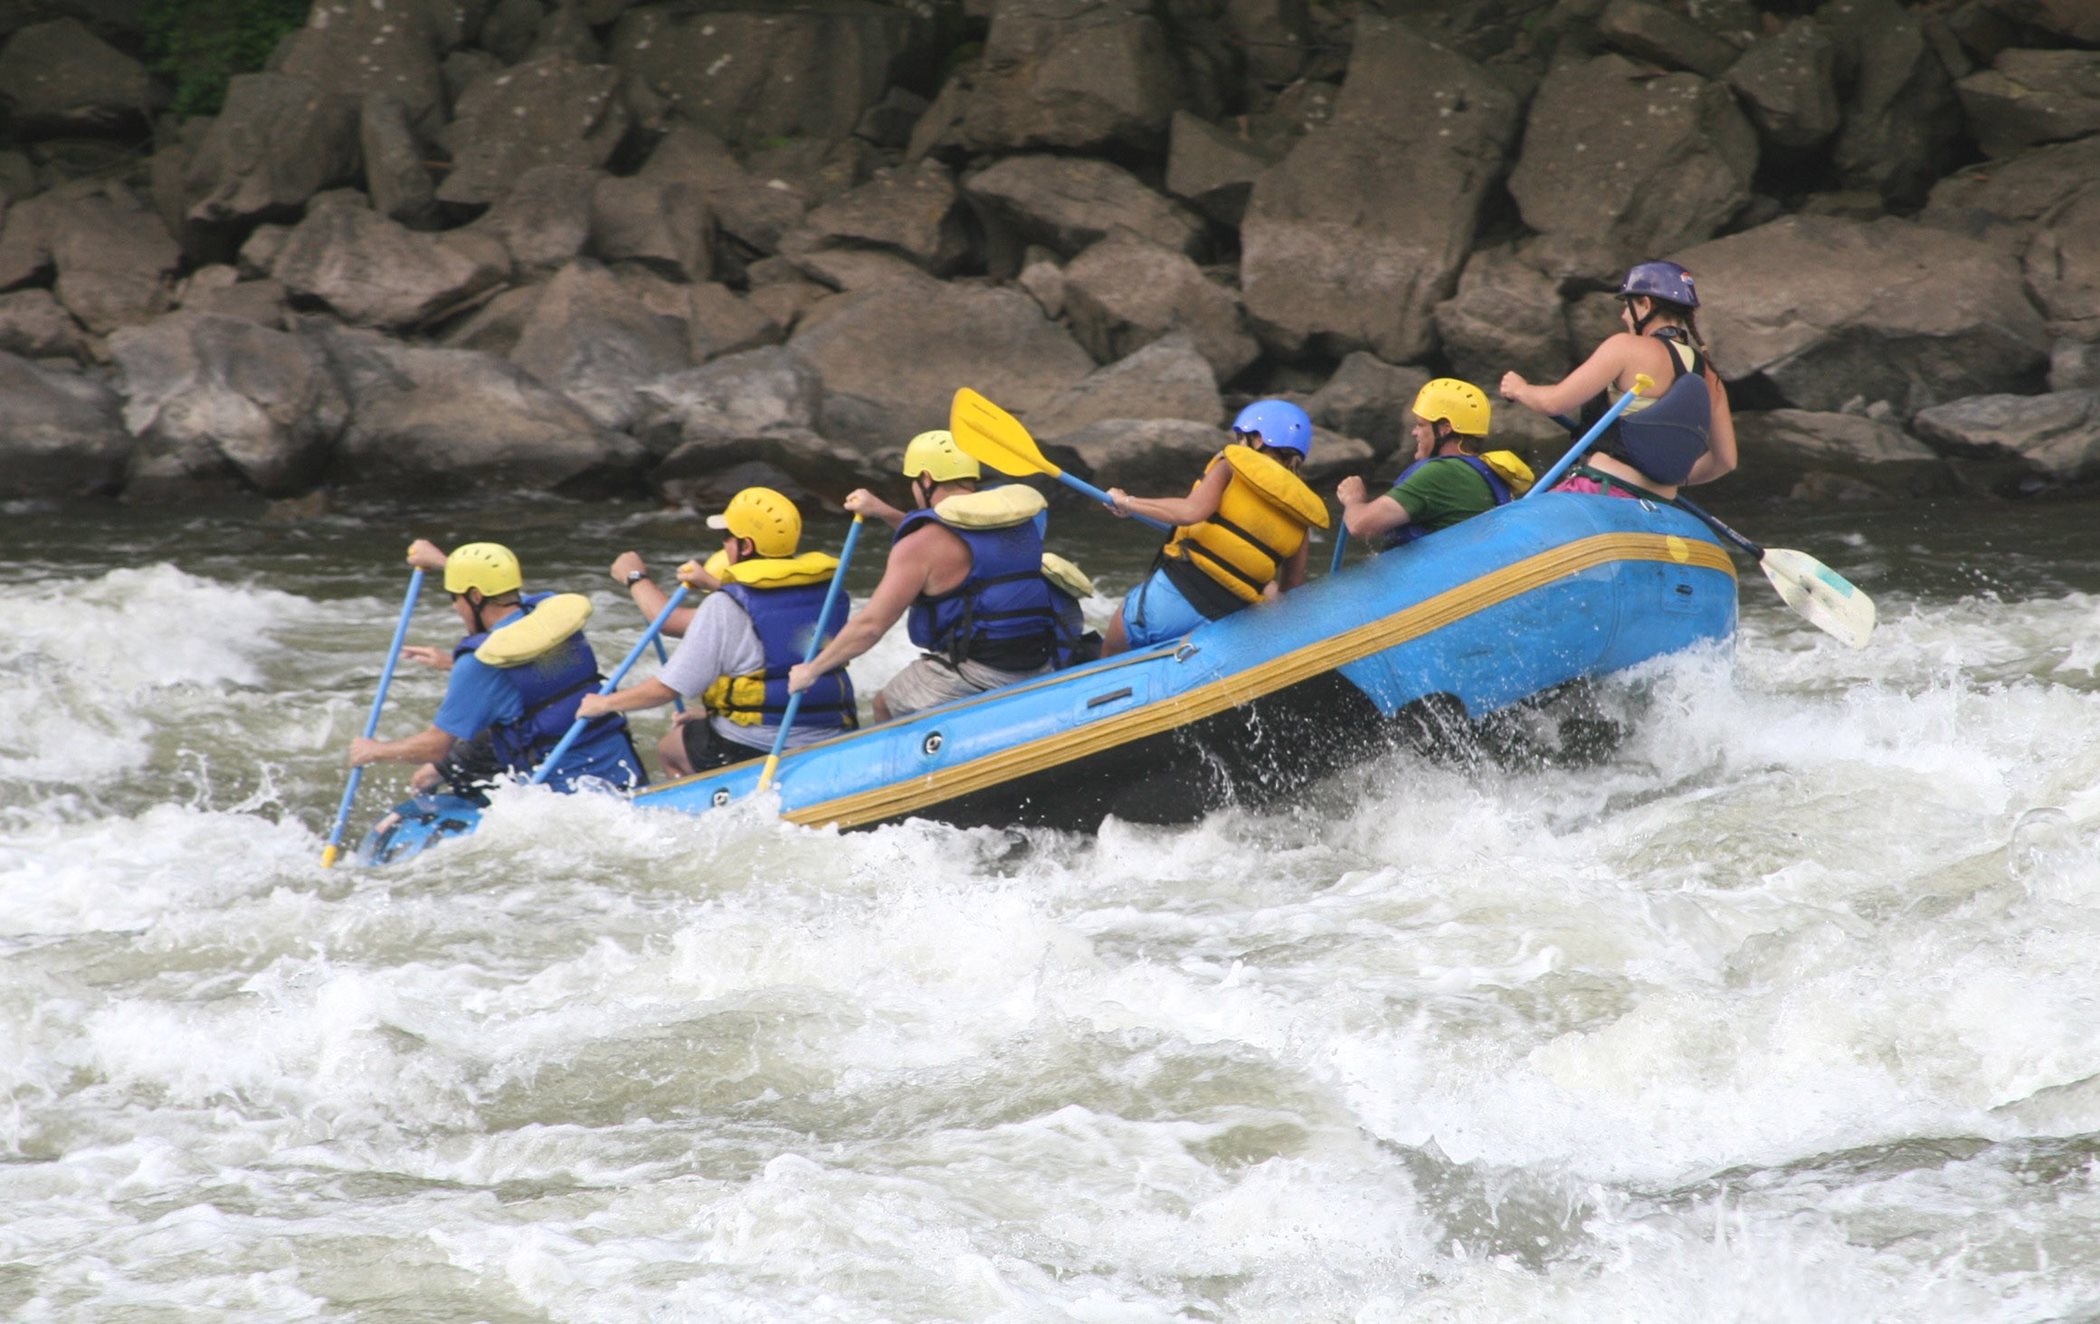 A group of people on a raft guide the boat through white splash with rocks in the background